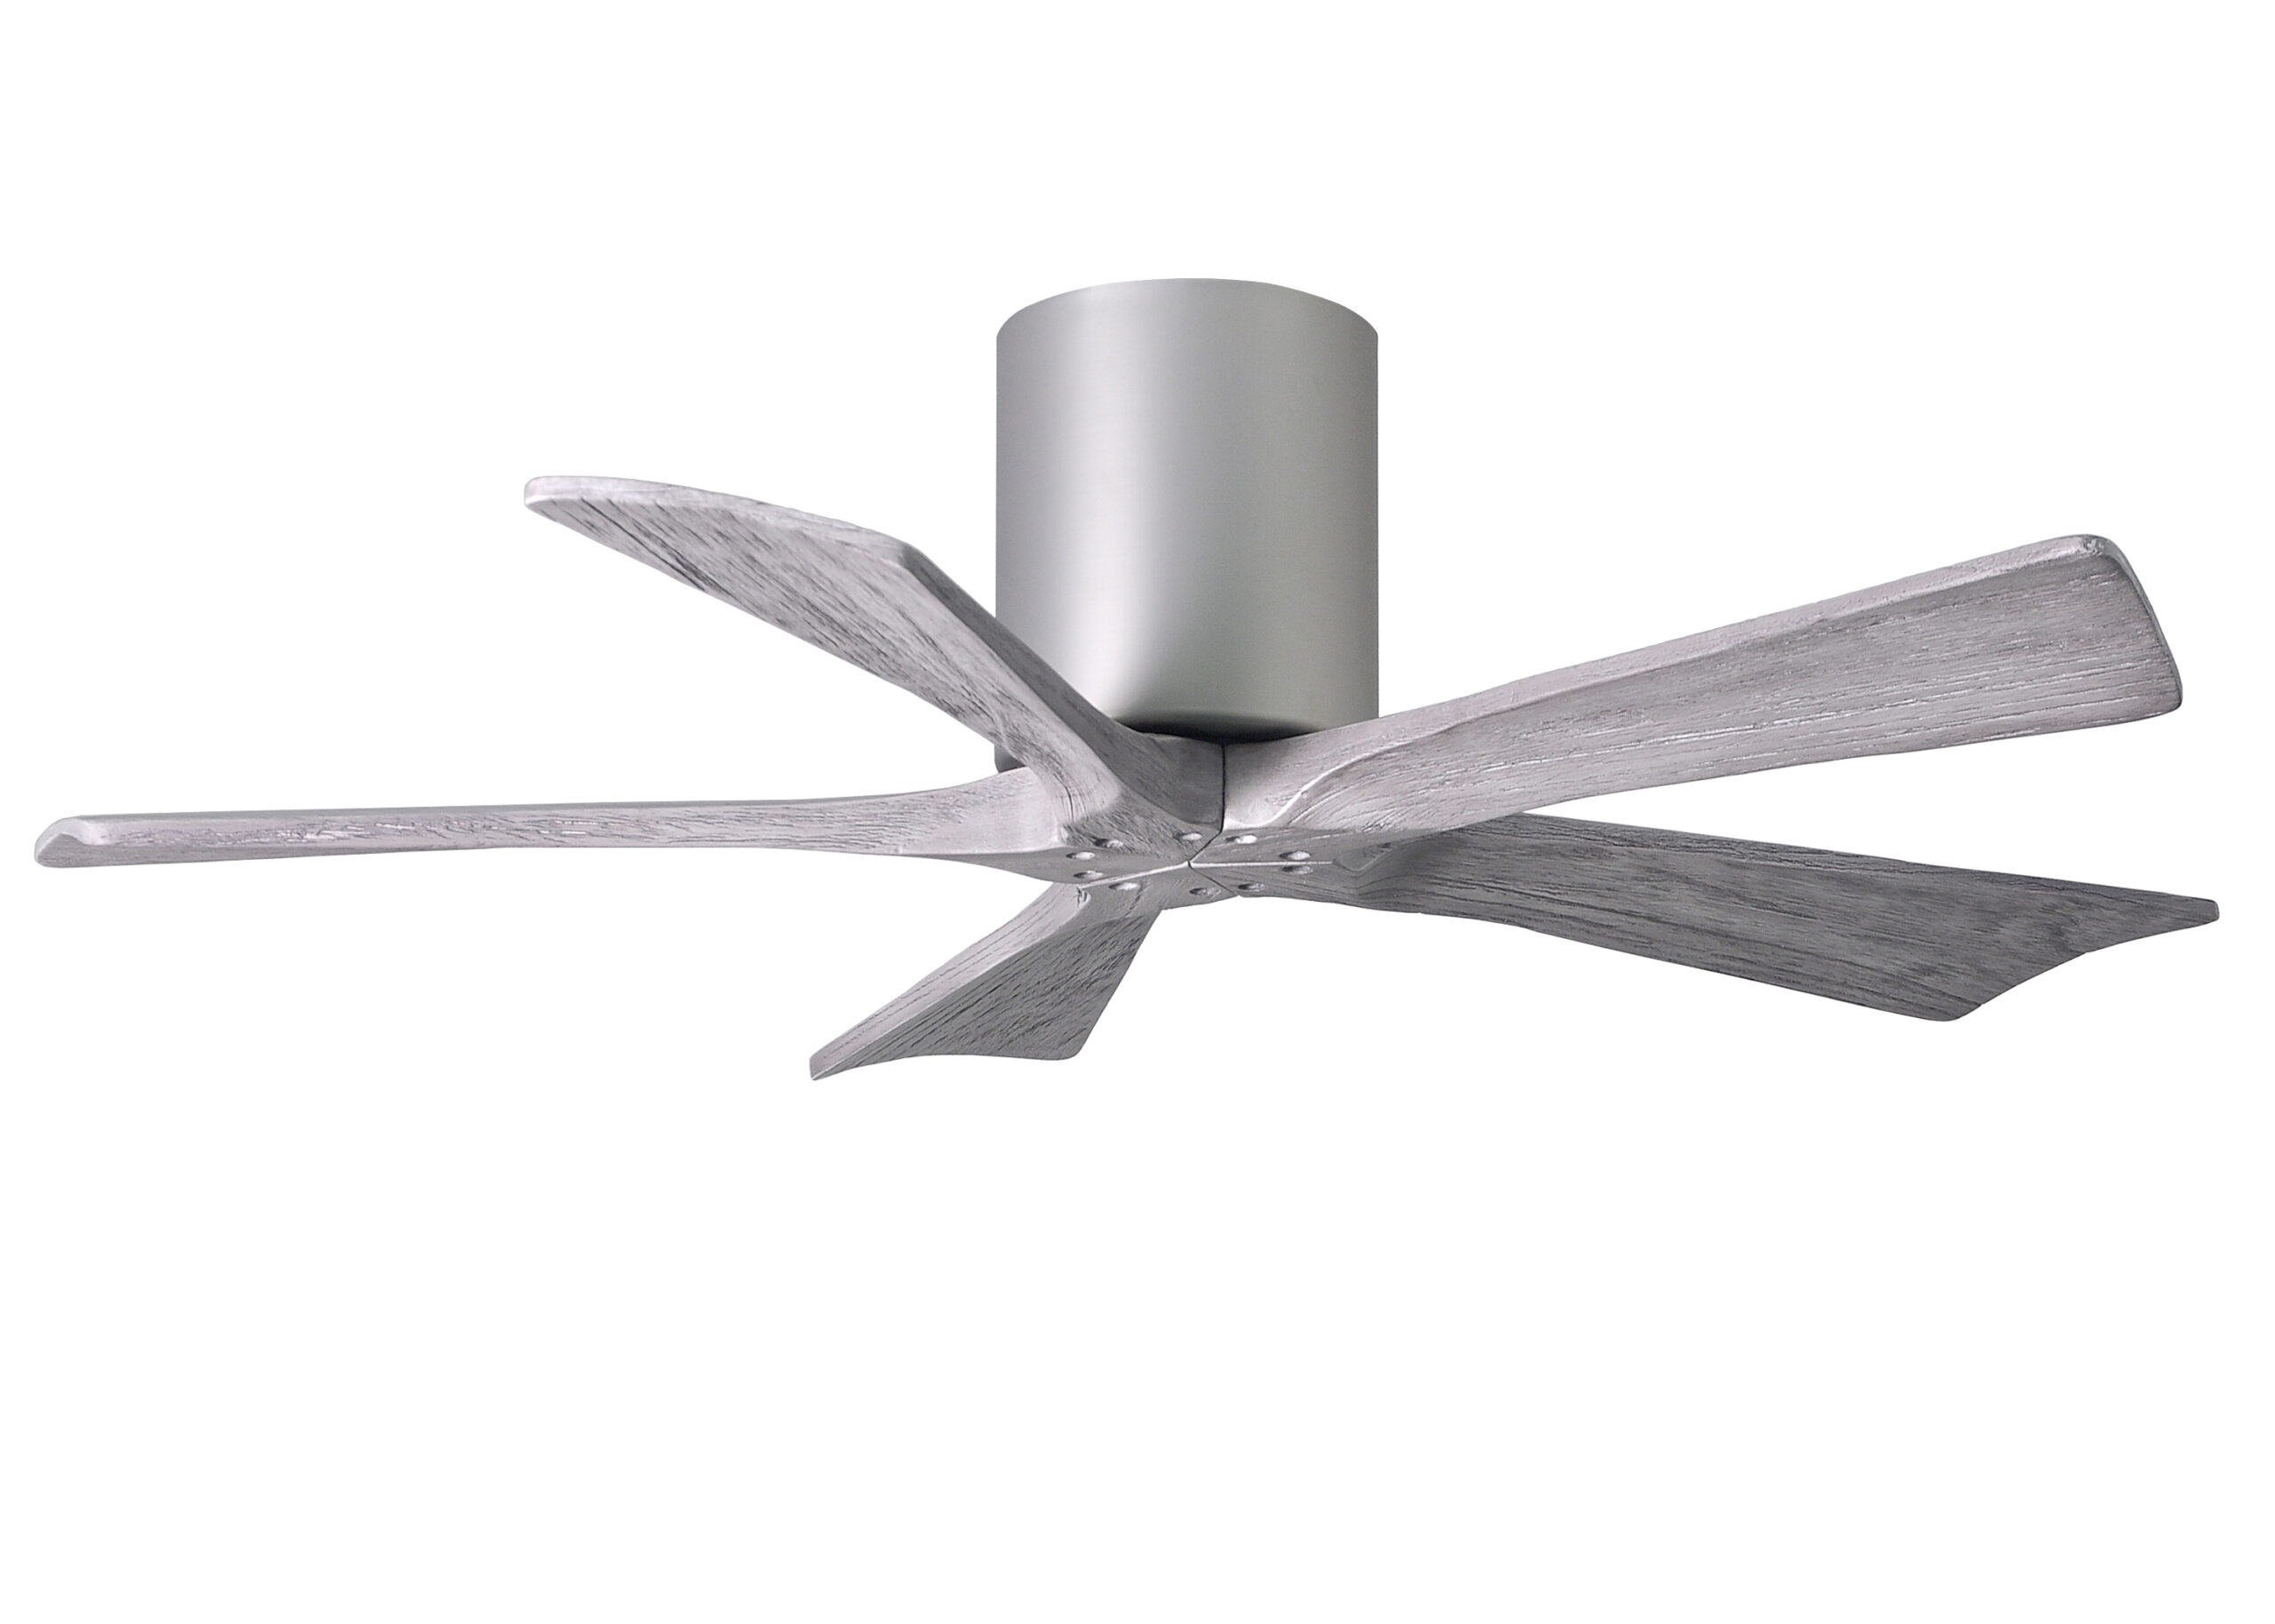 Irene-5H Ceiling Fan in Brushed Nickel Finish with 42